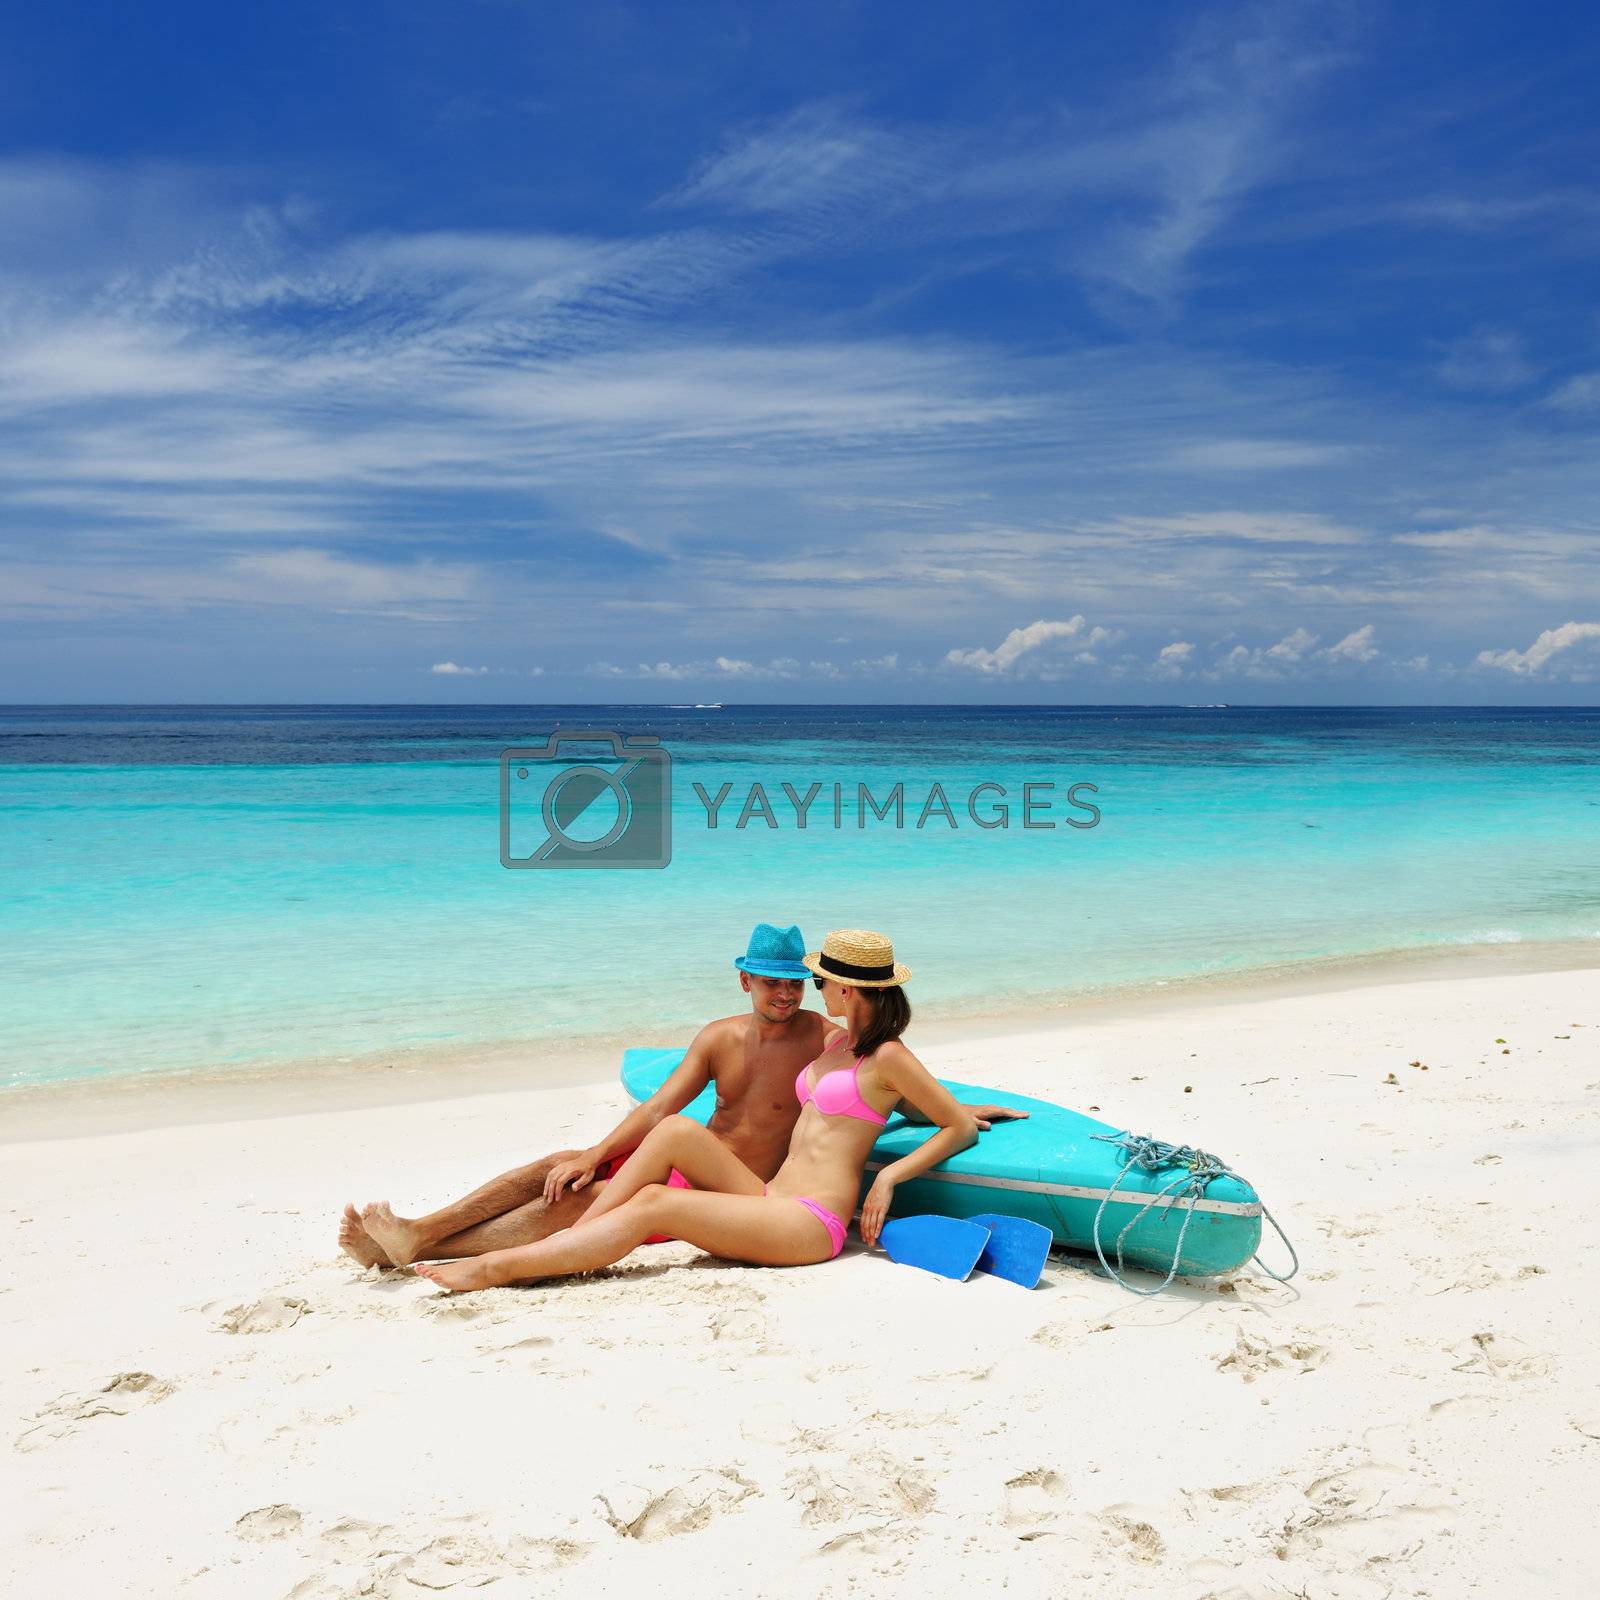 Royalty free image of Couple on a beach by haveseen